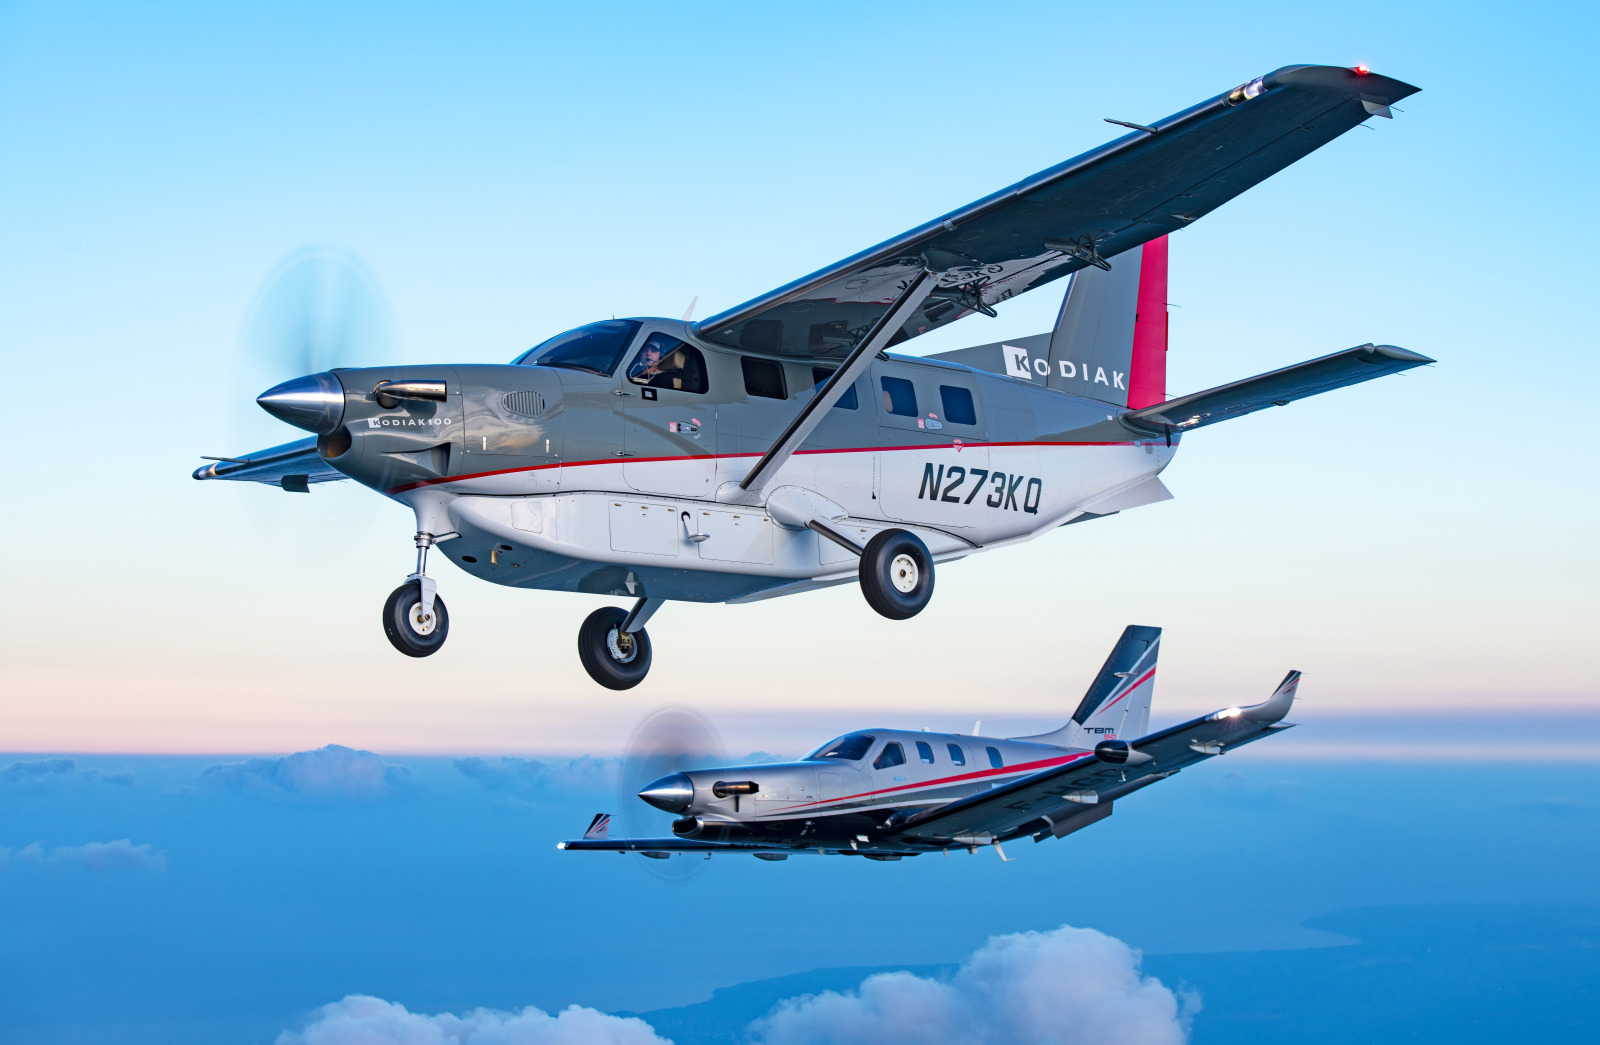 Daher logs sales of 68 turboprop aircraft in 2019 from its TBM and Kodiak  product lines - Daher